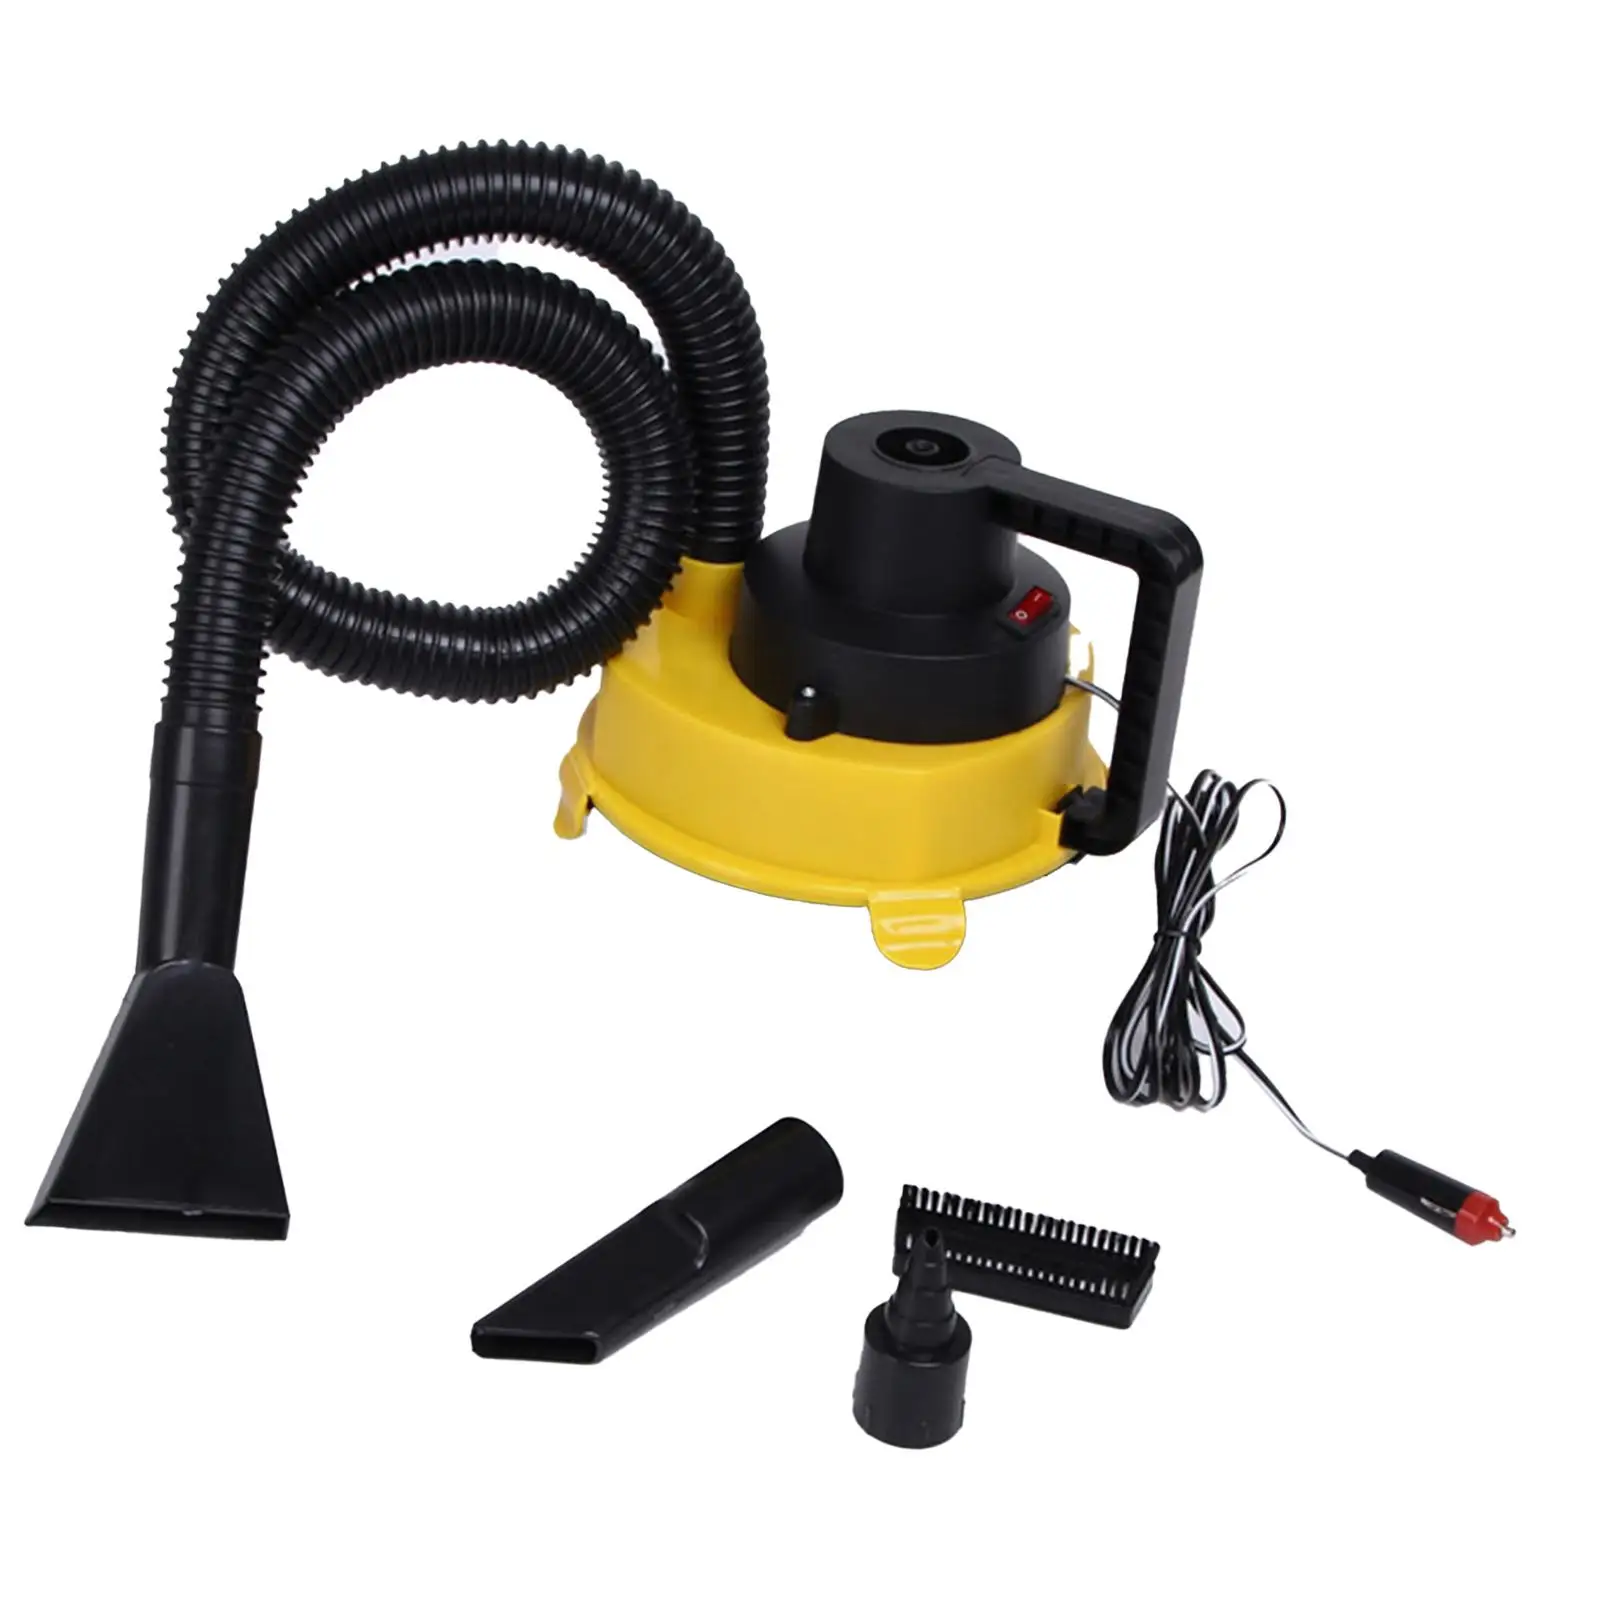 Car Vacuum Cleaner Quick Cleaning Portable Vacuum Cleaner Home Car Dual Use 12V Handheld Duster for Camper RV Vehicle Boat